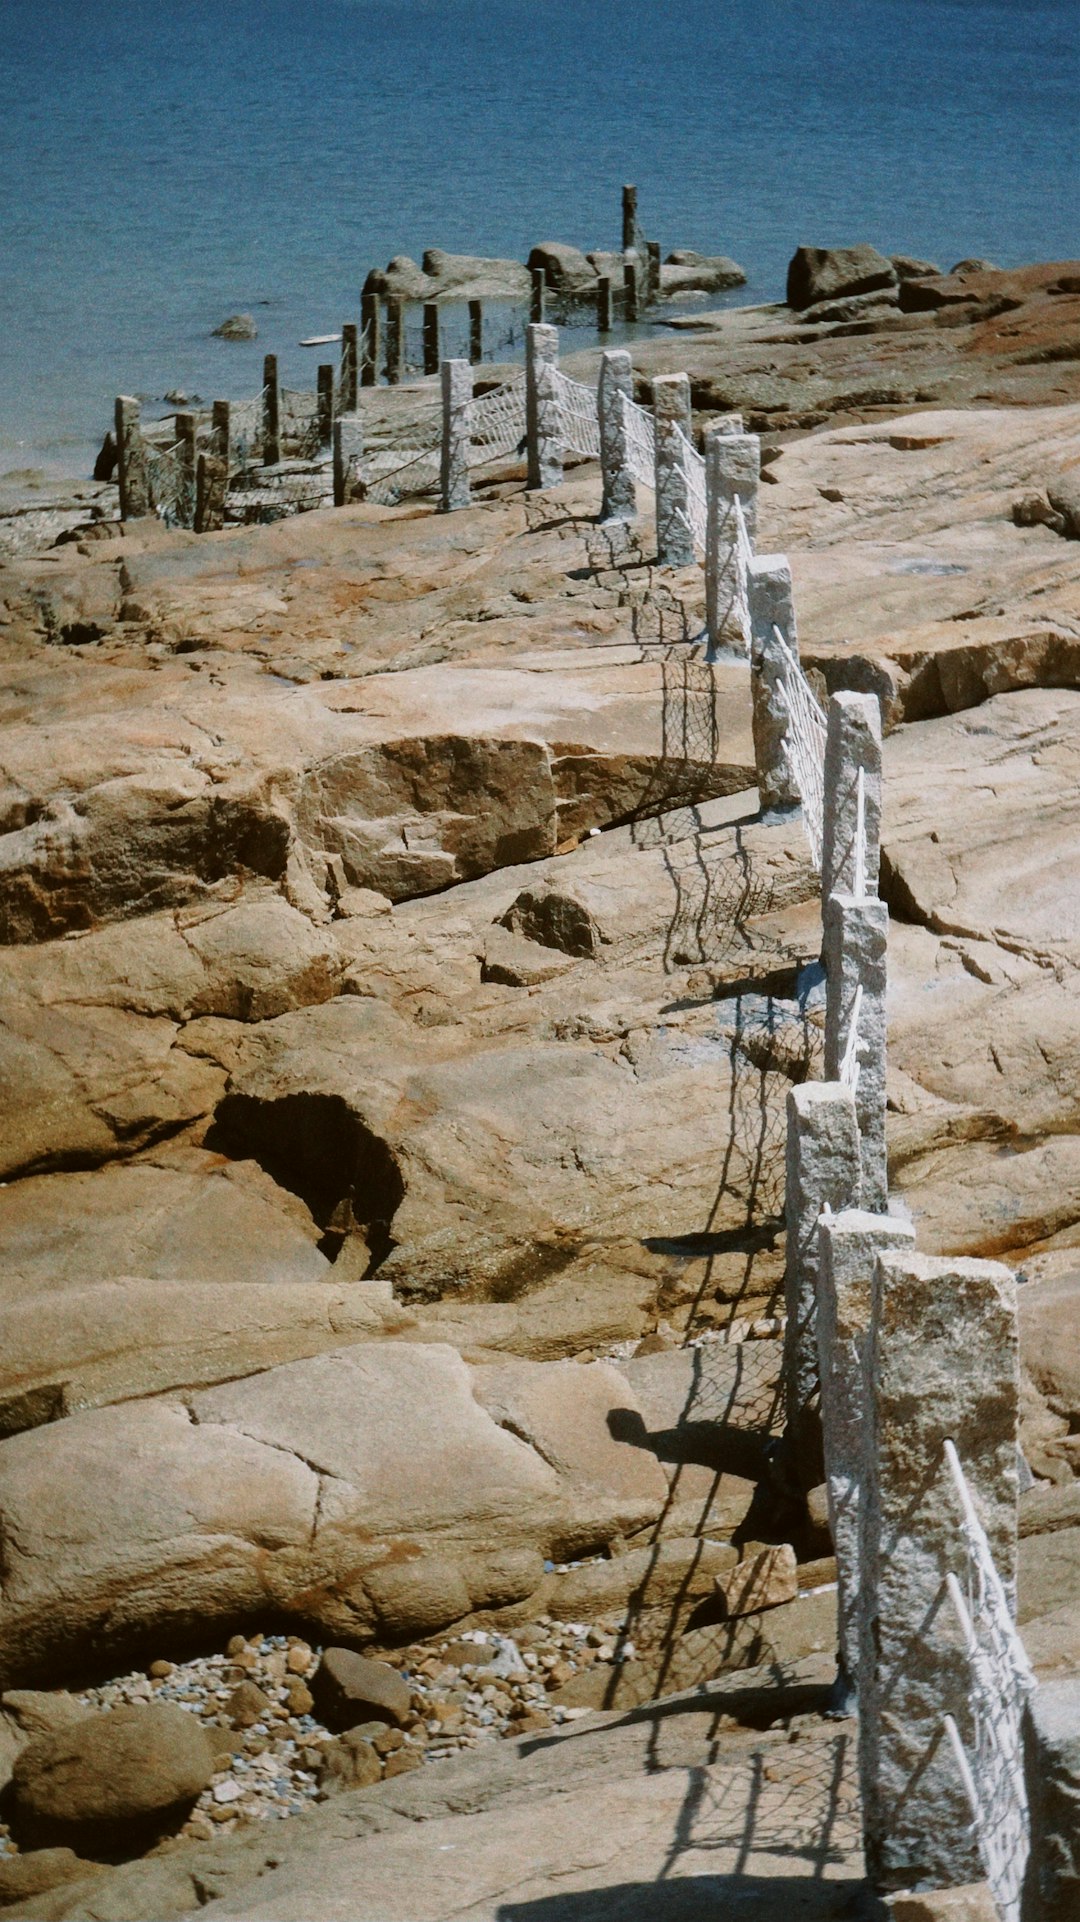 gray concrete stairs on brown rocky mountain during daytime